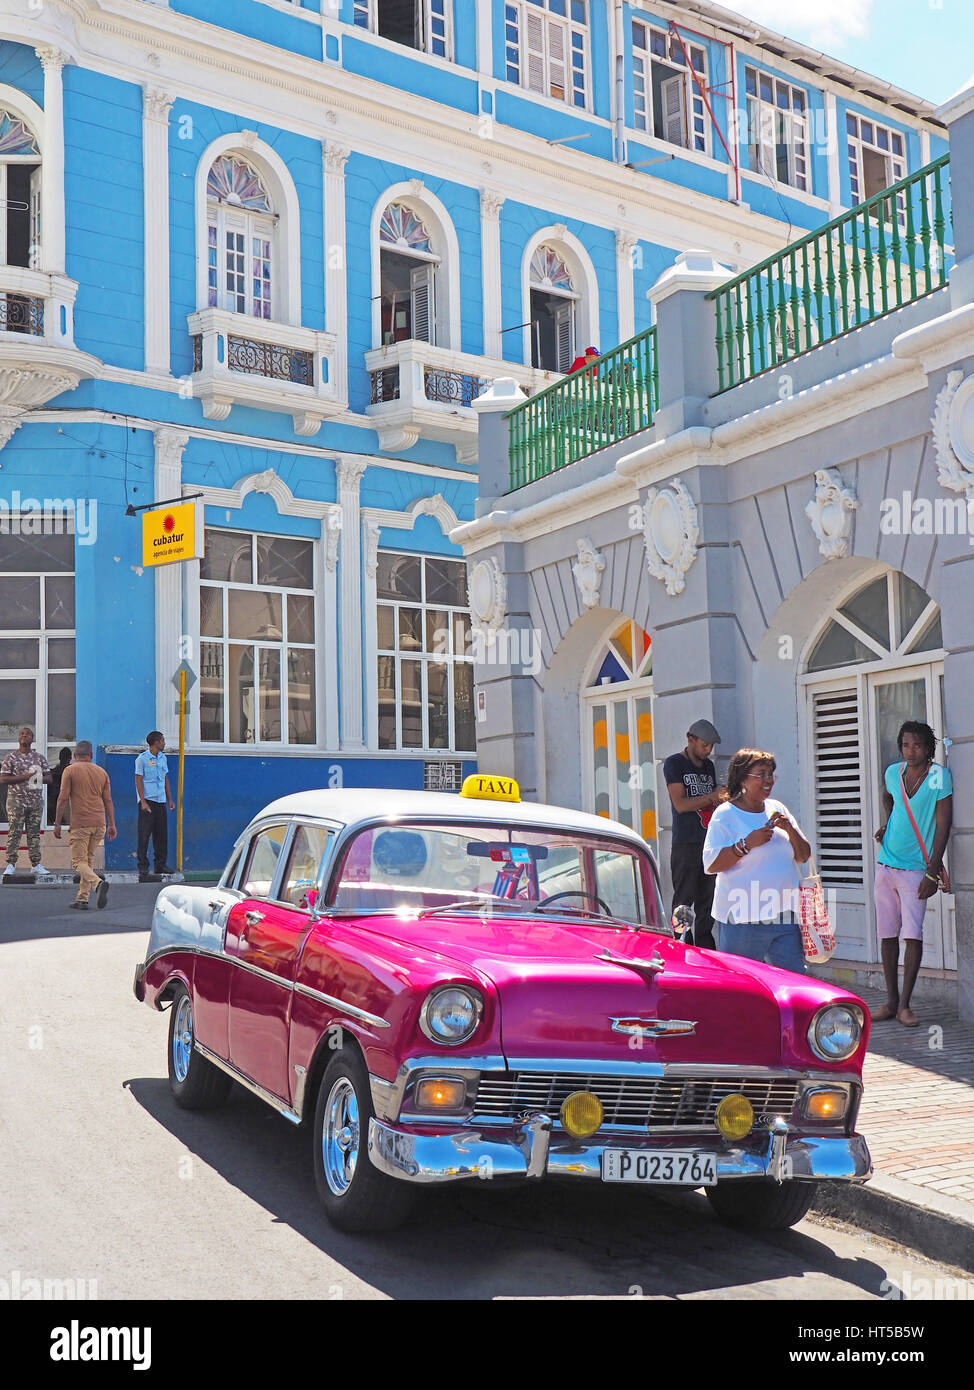 Restored American 1956 Chevrolet being used as a privately owned taxi with colonial architecture in Cespedes Parque Santiago de Cuba. Stock Photo